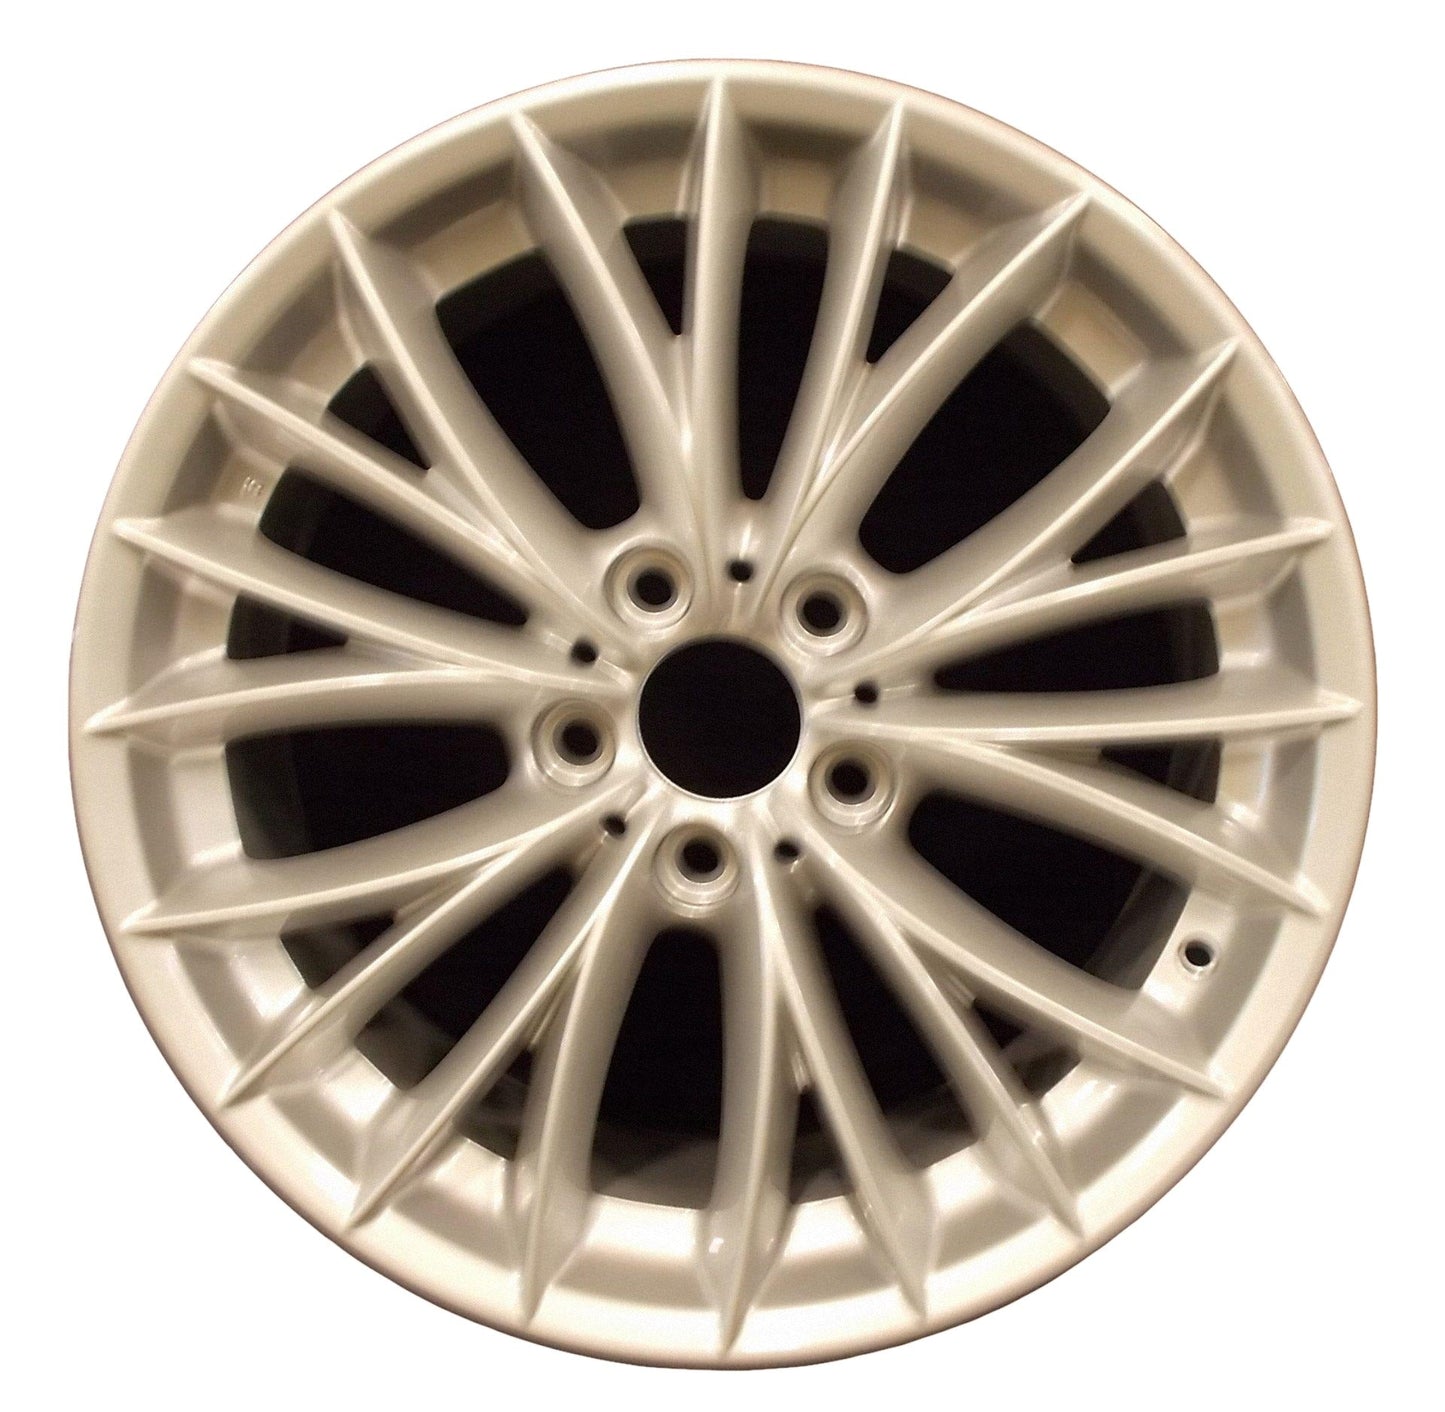 BMW 328i  2008, 2009, 2010, 2011, 2012, 2013 Factory OEM Car Wheel Size 18x8 Alloy WAO.71456FT.PS15.FF